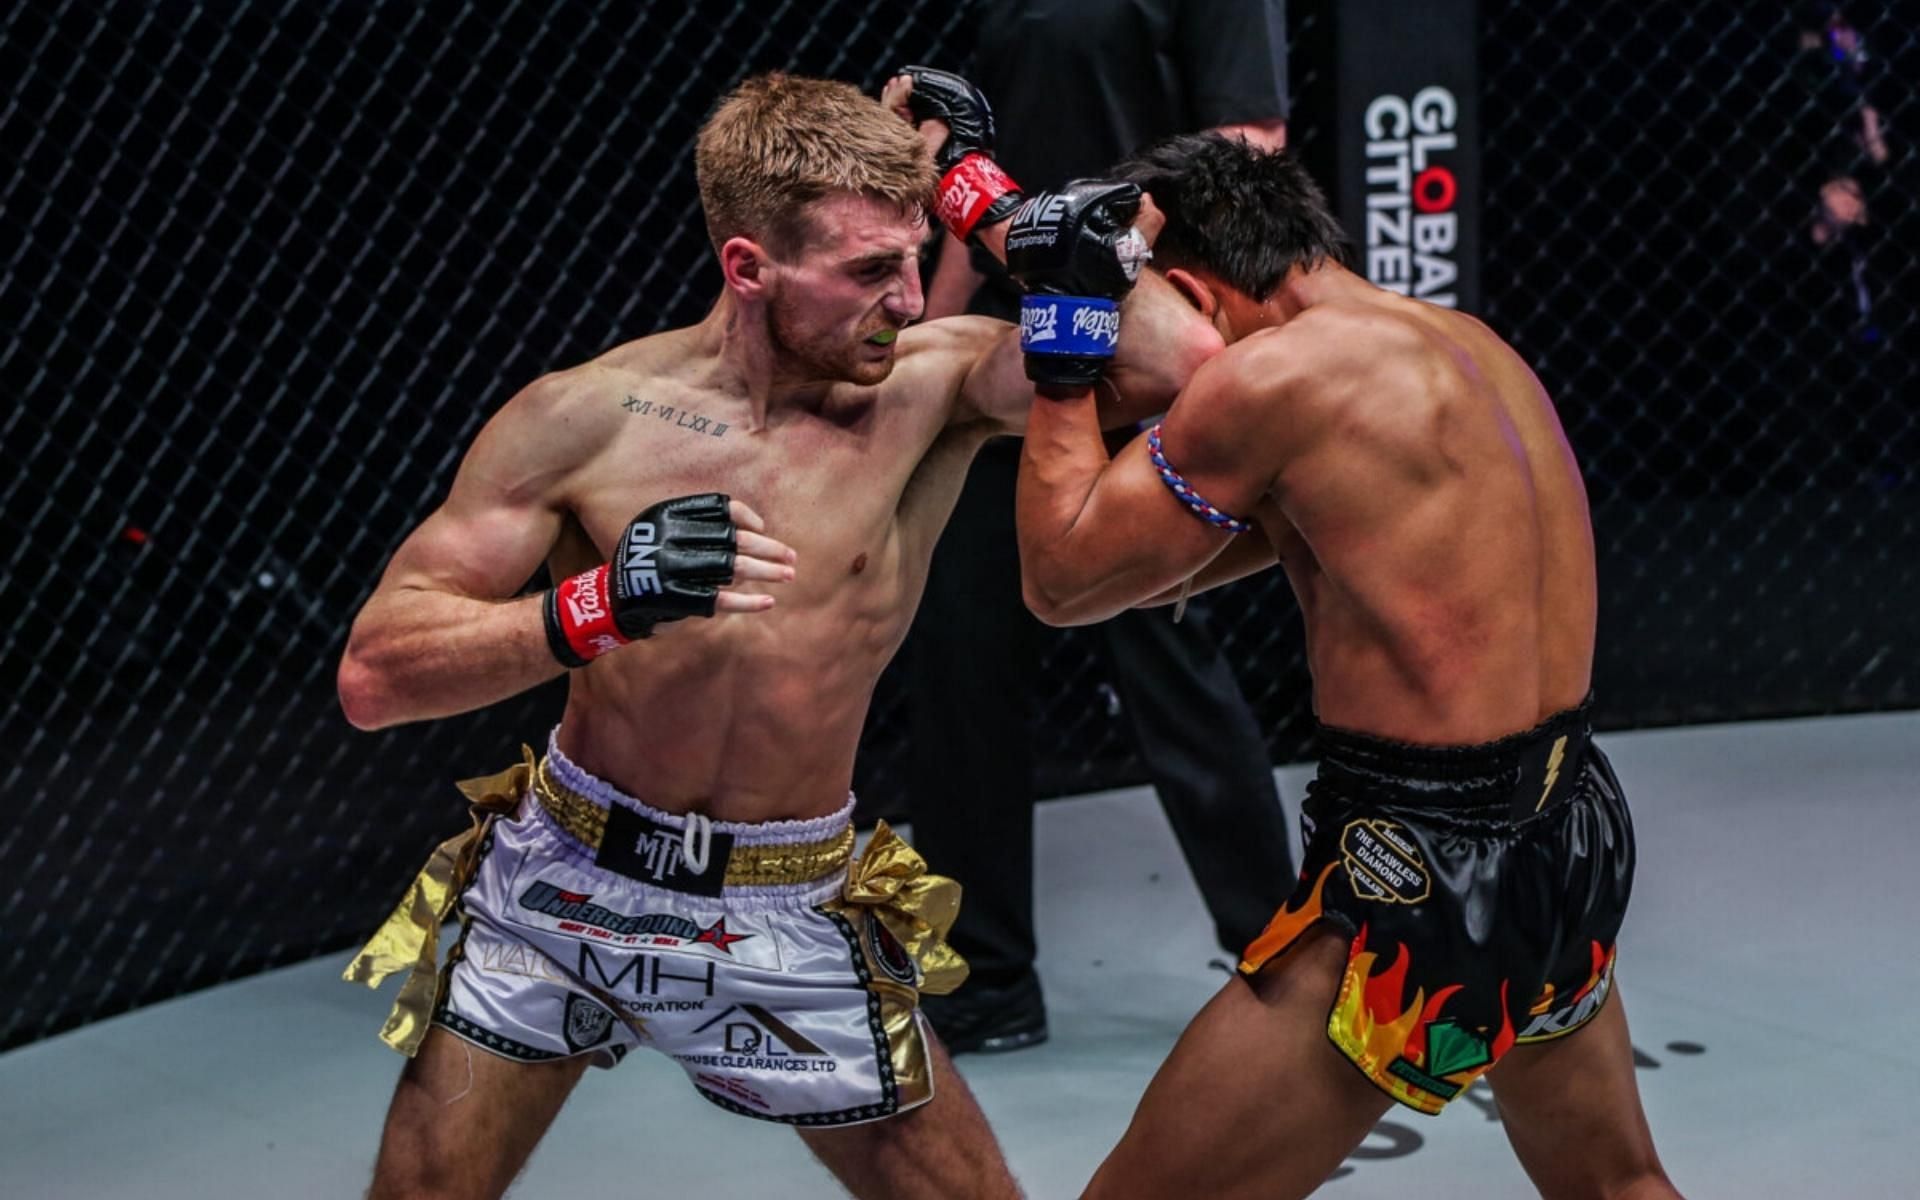 Jonathan Haggerty (left) put on a gutsy performance in the co-main event of ONE Championship: Bad Blood. (Image courtesy of ONE Championship)